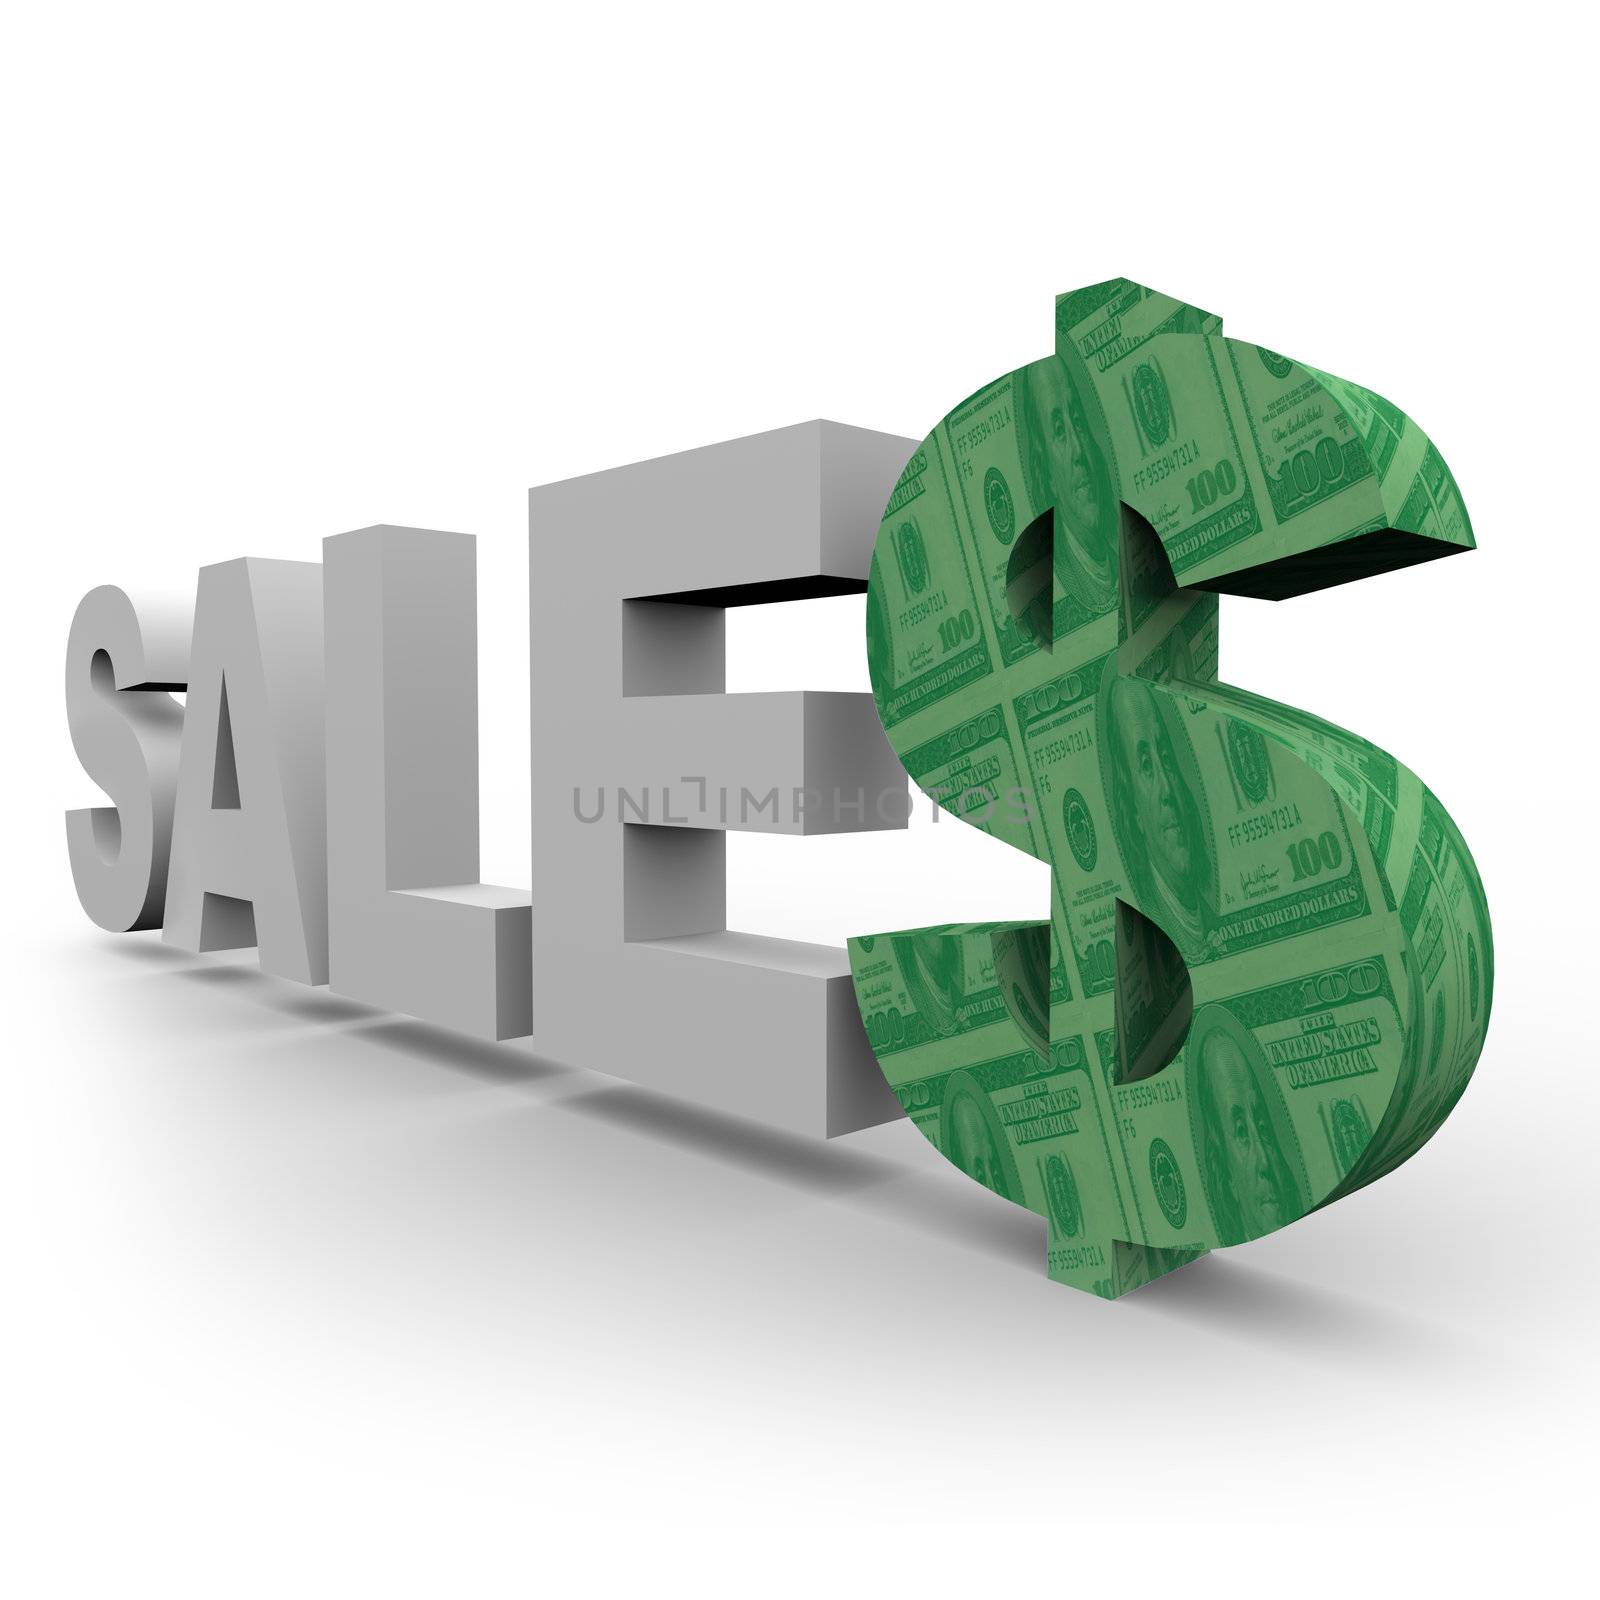 The word Sales in 3D letters with dollar signs in the final letter S, illustrating financial success and reaching selling targets for a business